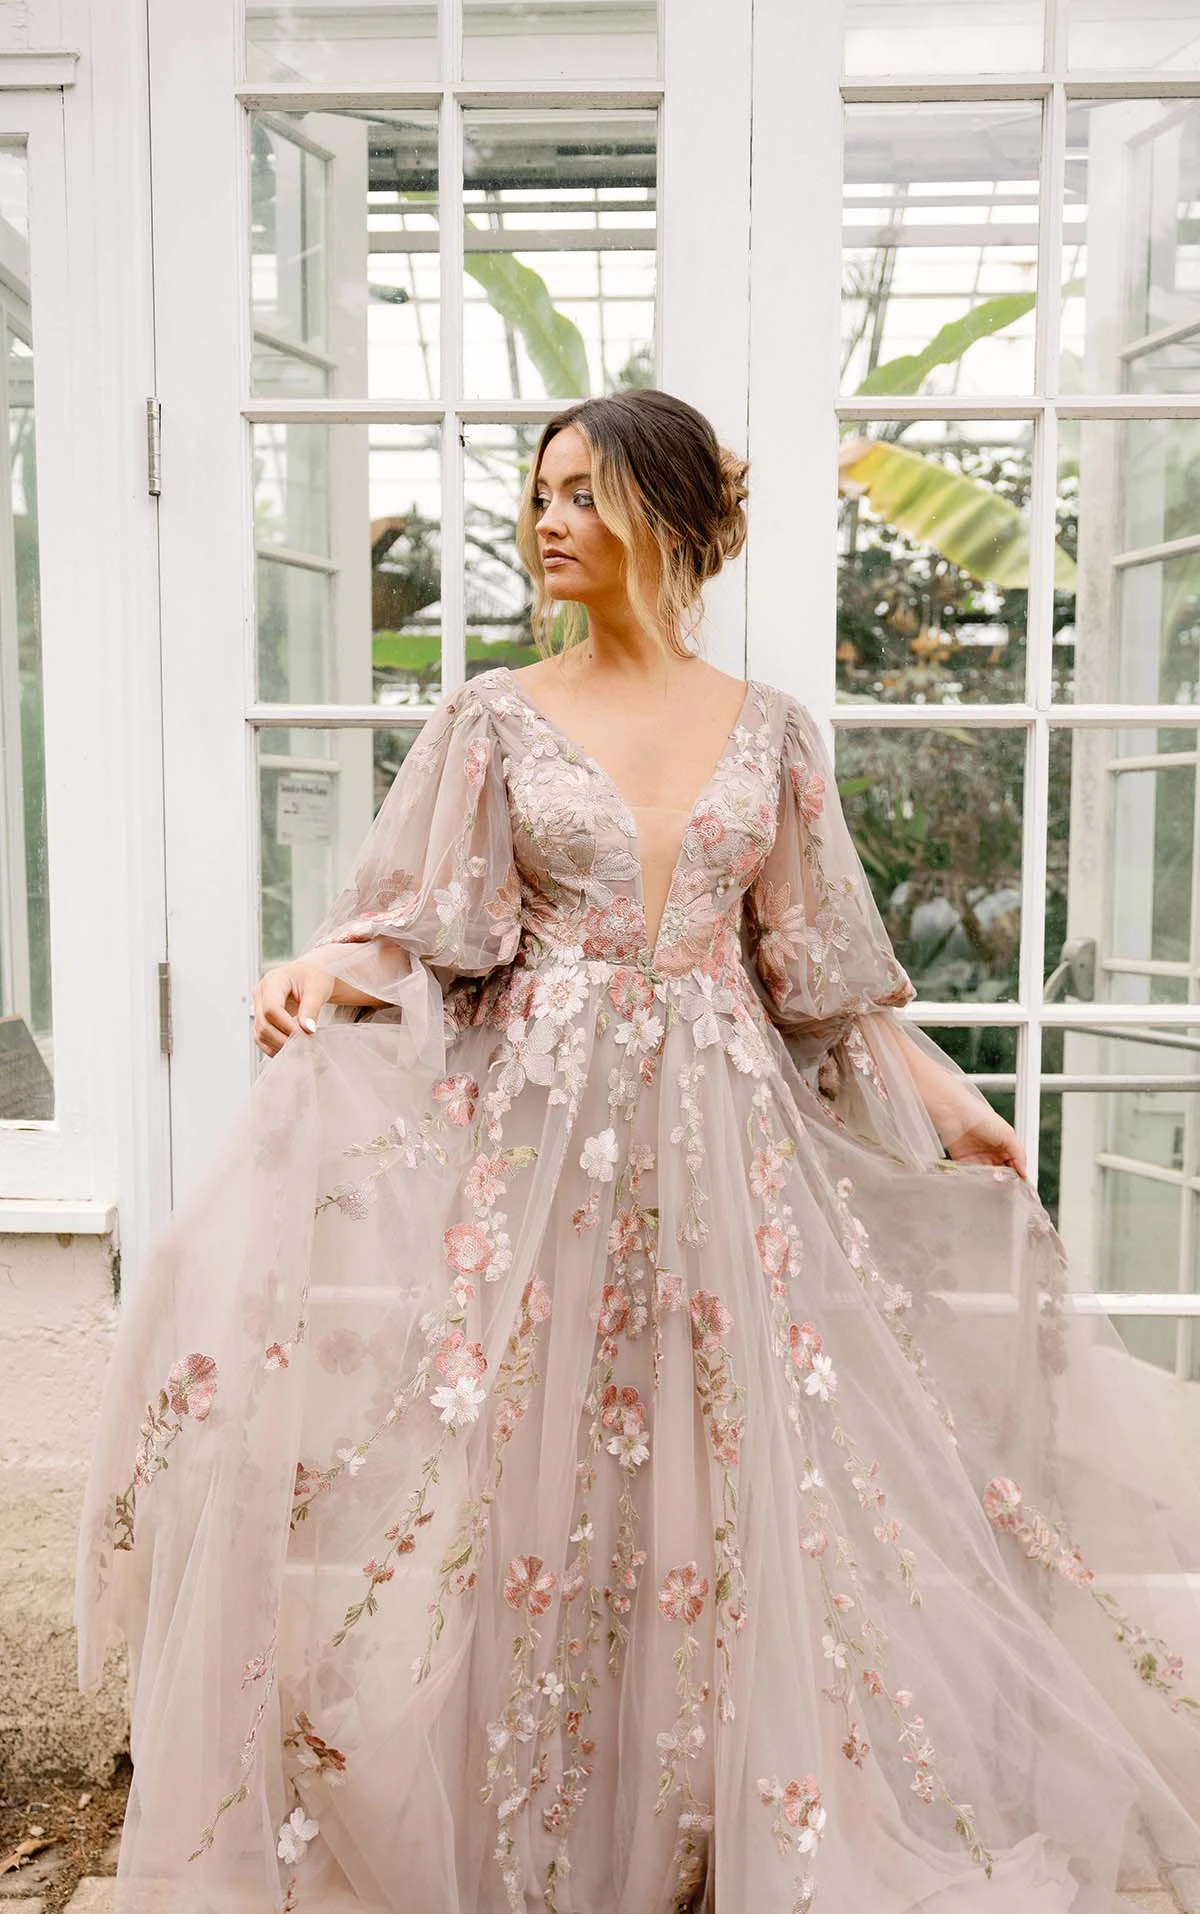 colored floral lace wedding dress with plunging neckline and sleeves - saylor by All Who Wander